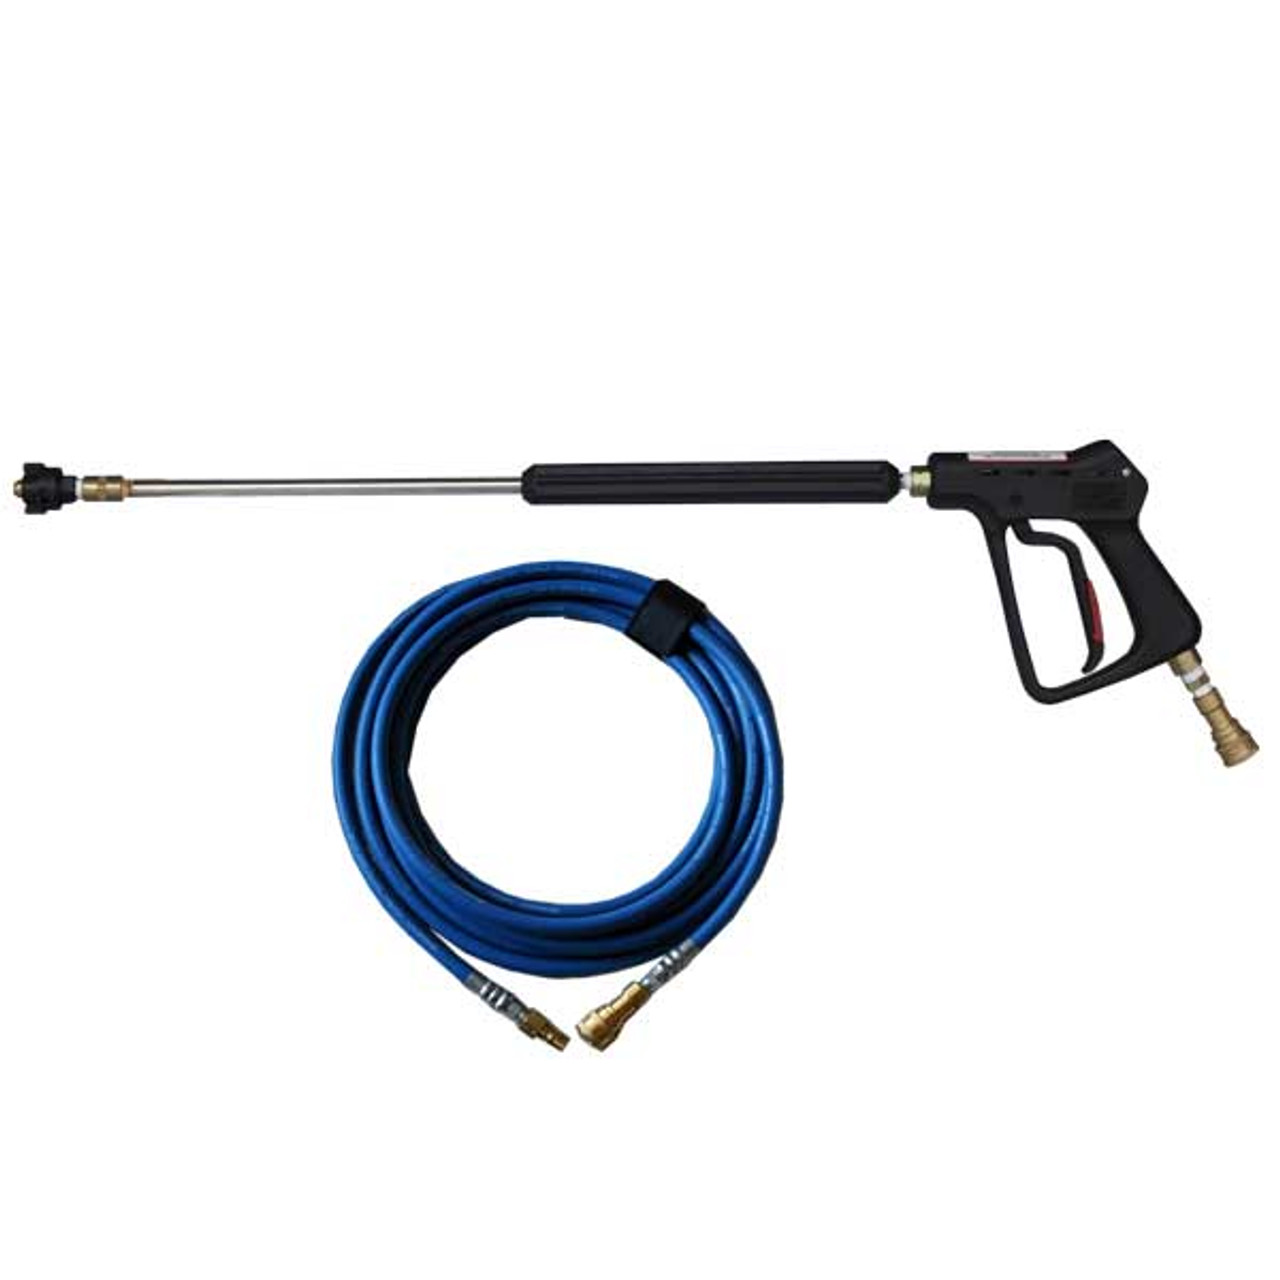 37” commercial tough misting gun for extended reach to high and low areas with ease; comes standard with machine.
